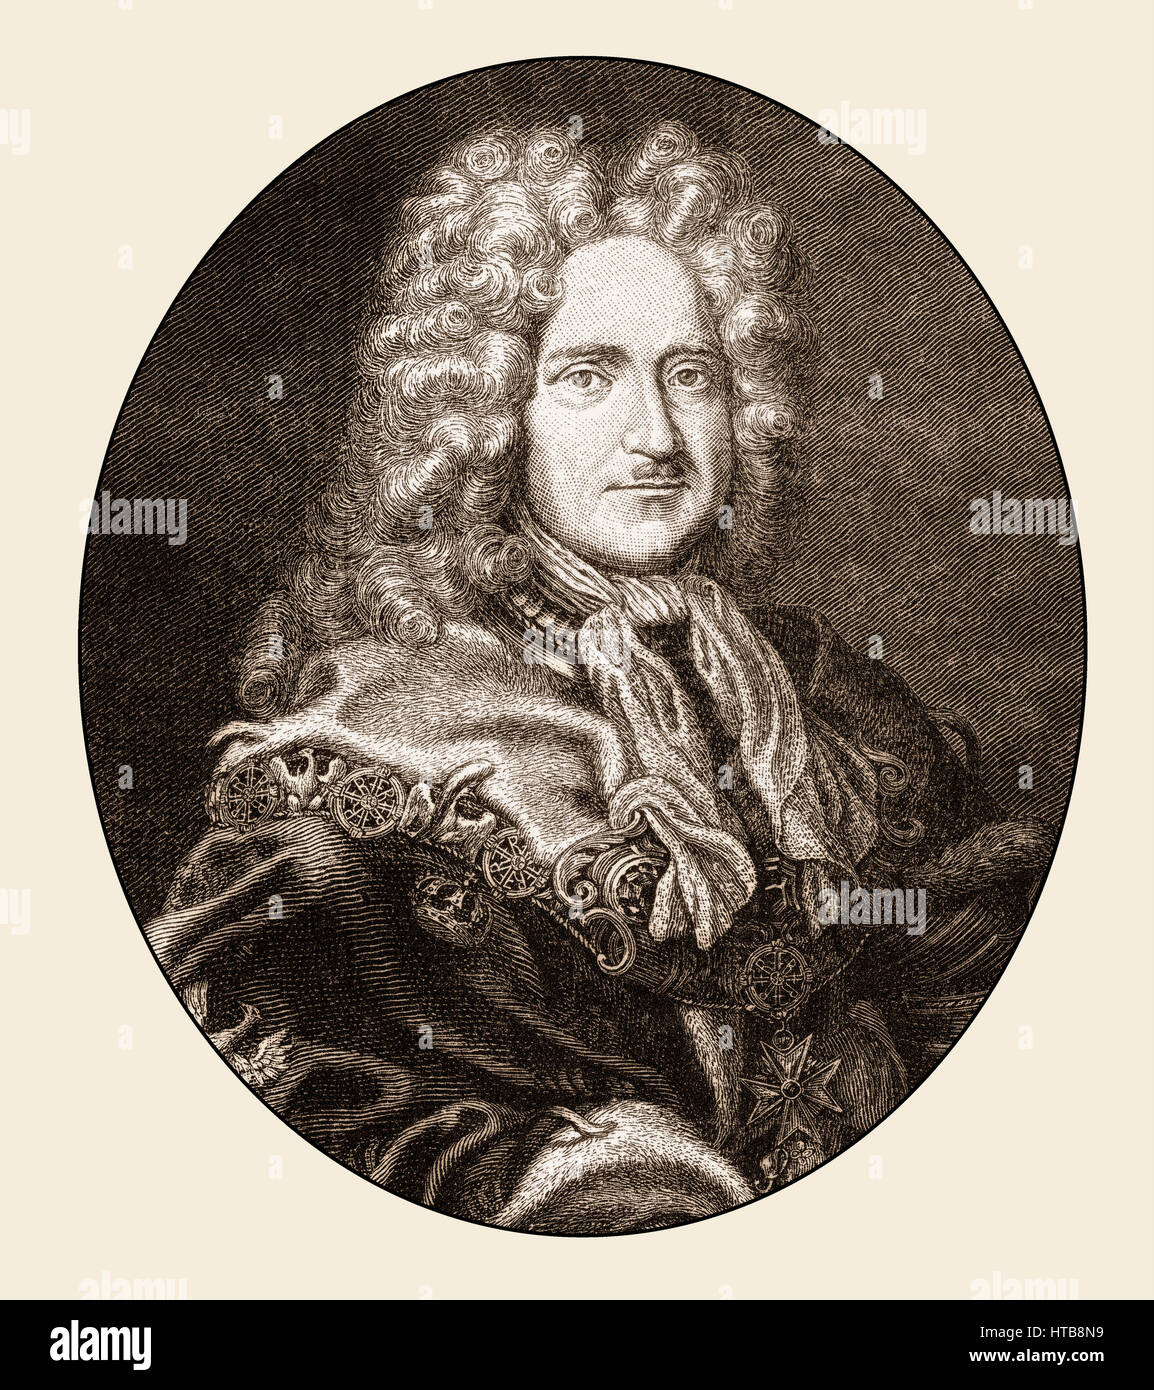 Frederick I, 1657 - 1713, the first King in Prussia, as Frederick III Elector of Brandenburg, Stock Photo